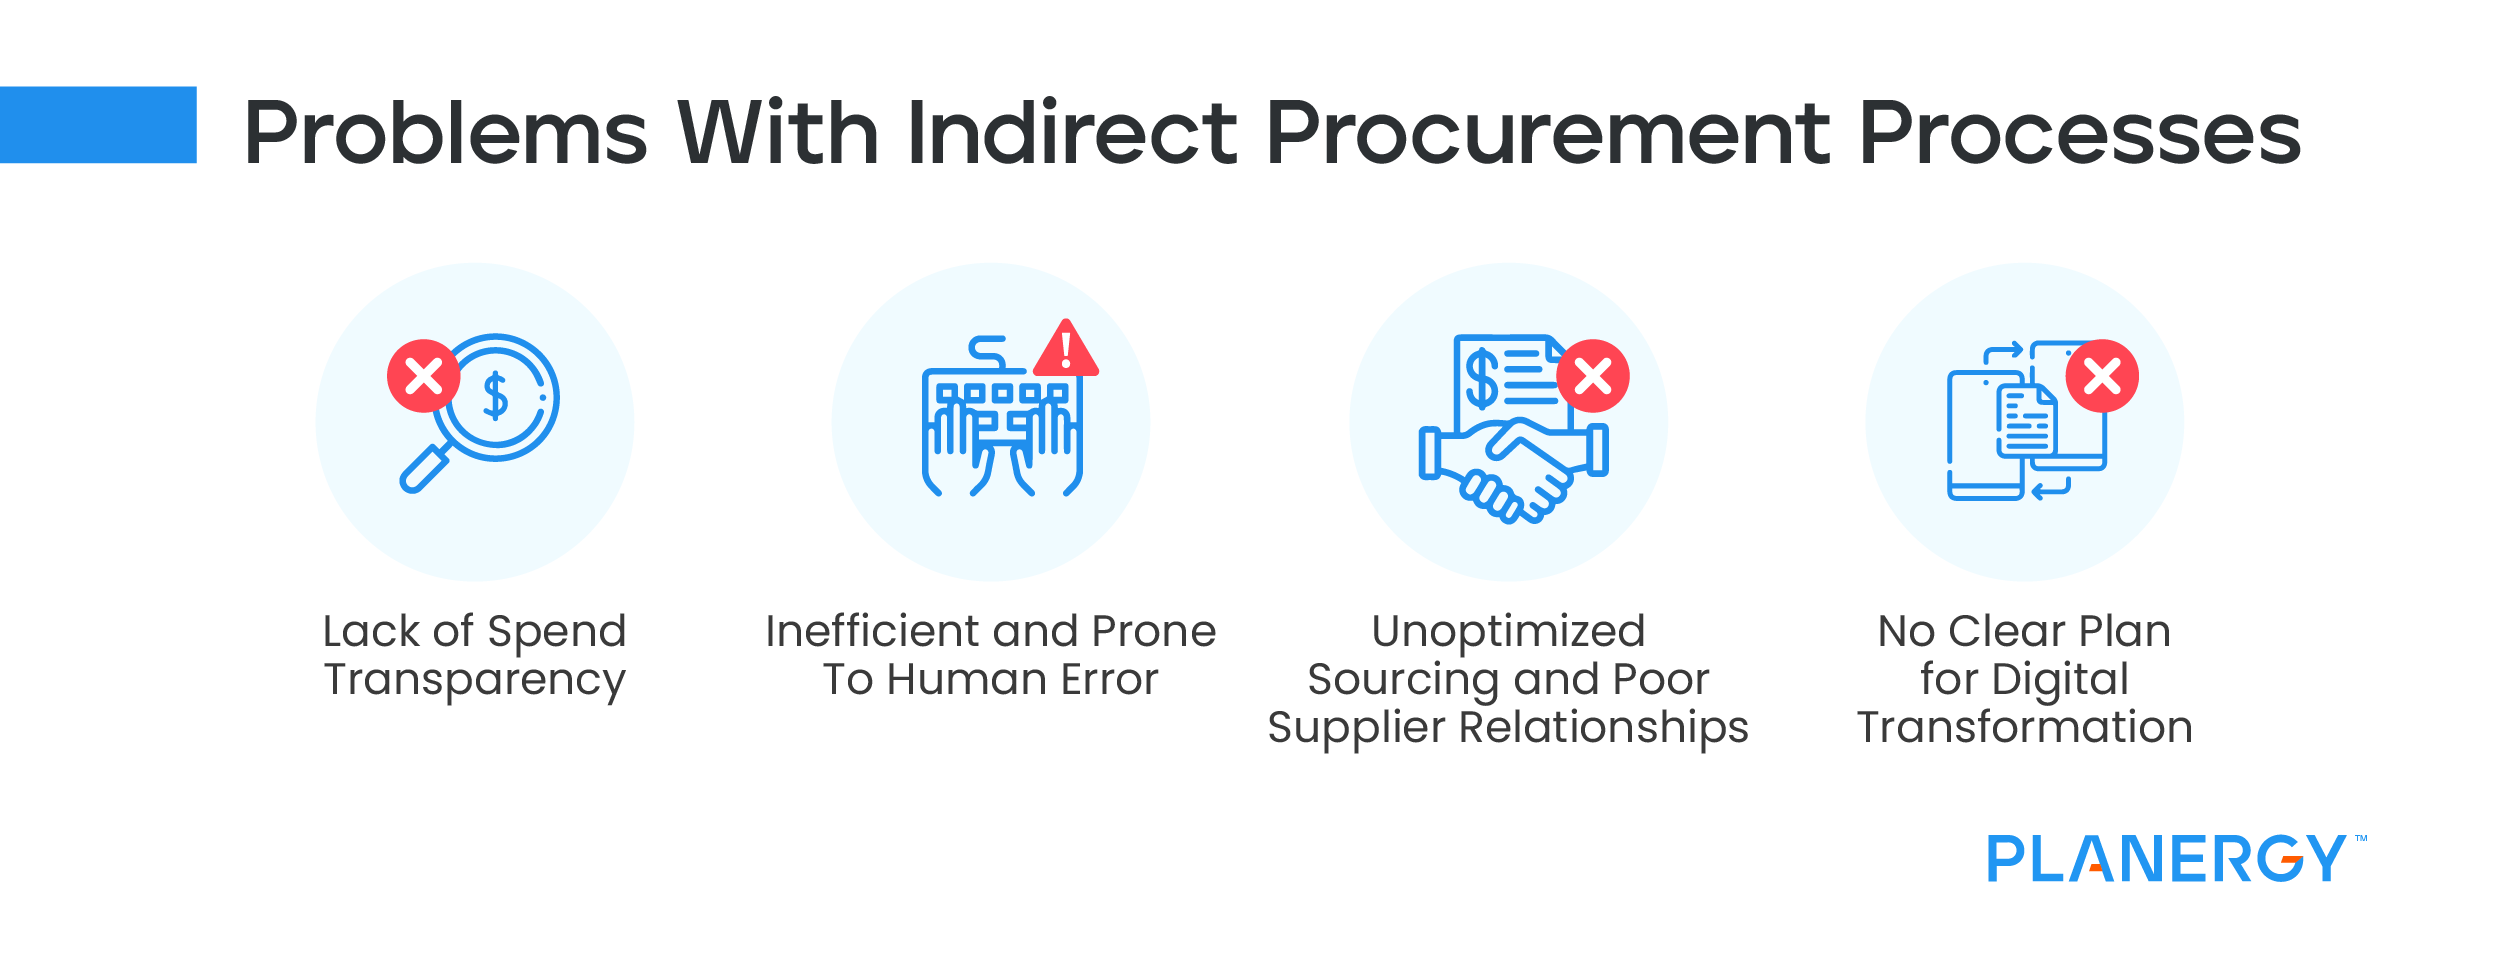 Problems with Indirect Procurement Processes